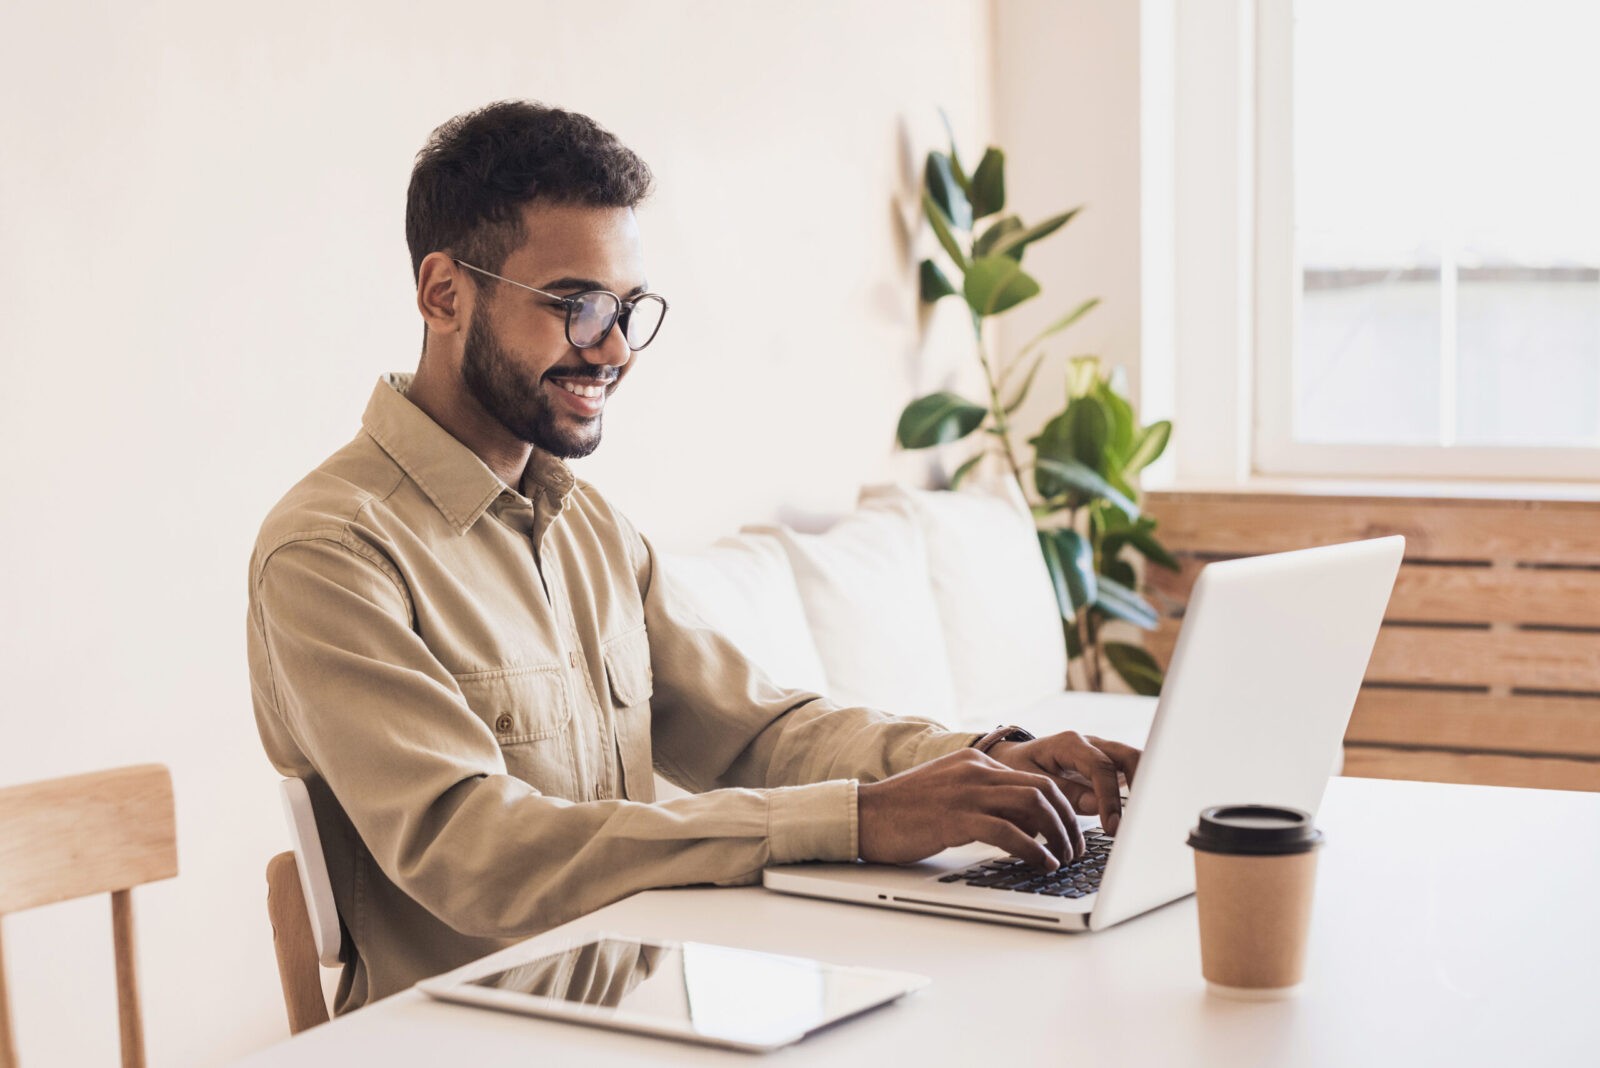 Man with glasses working from home on laptop